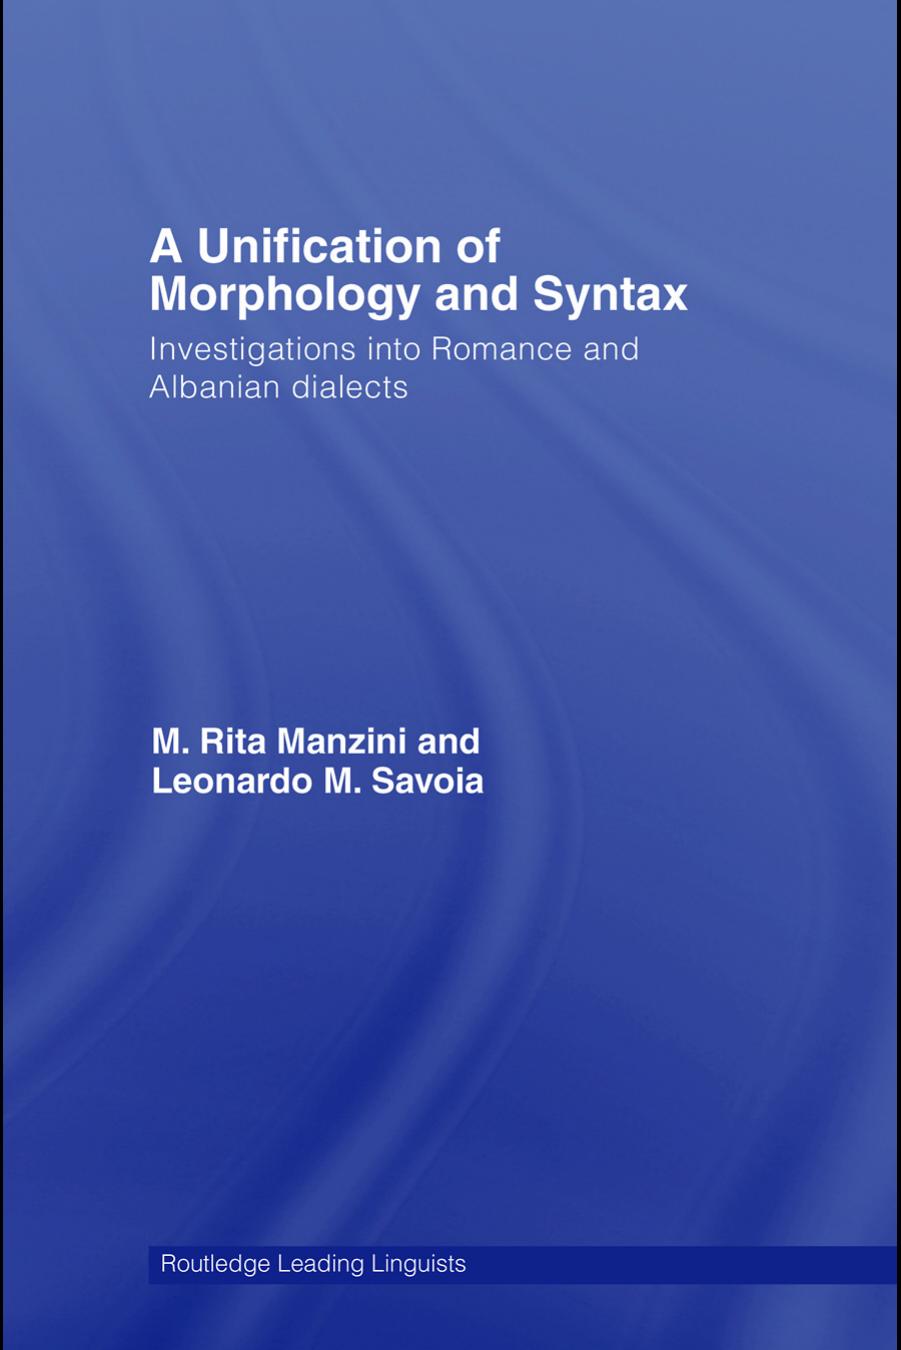 A Unification of Morphology and Syntax: Investigations Into Romance and Albanian Dialects